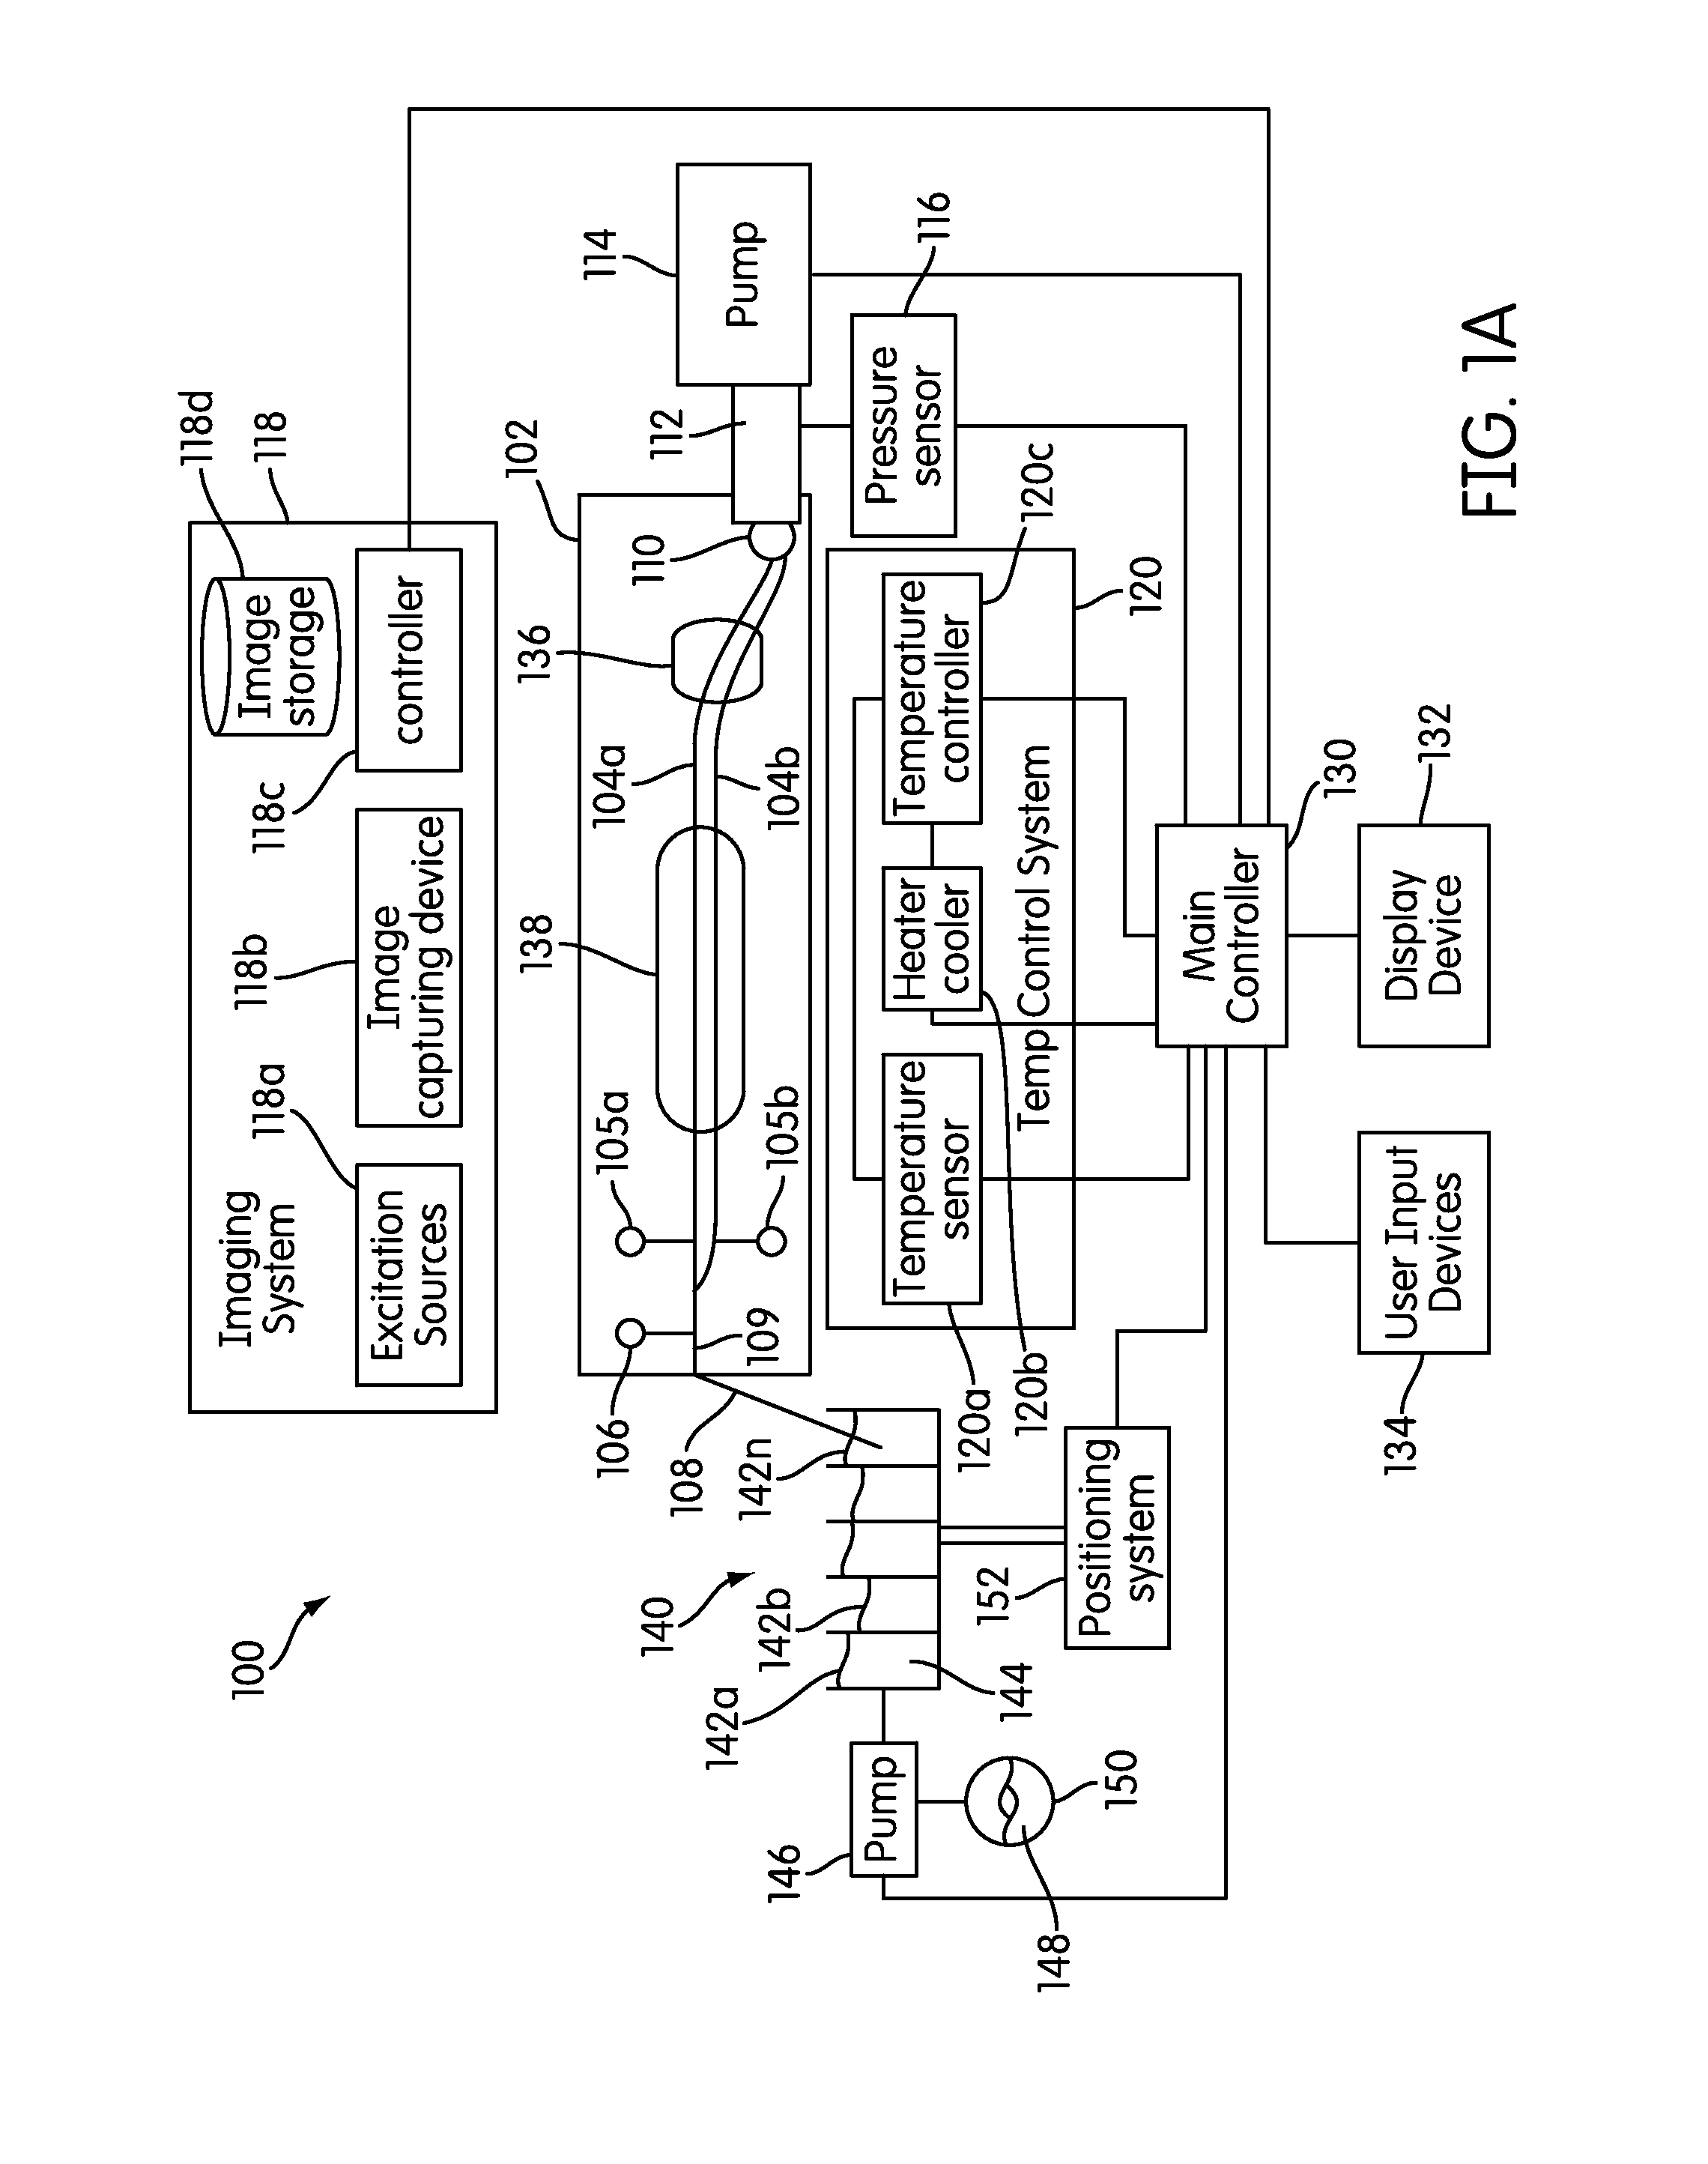 System and method for serial processing of multiple nucleic acid assays